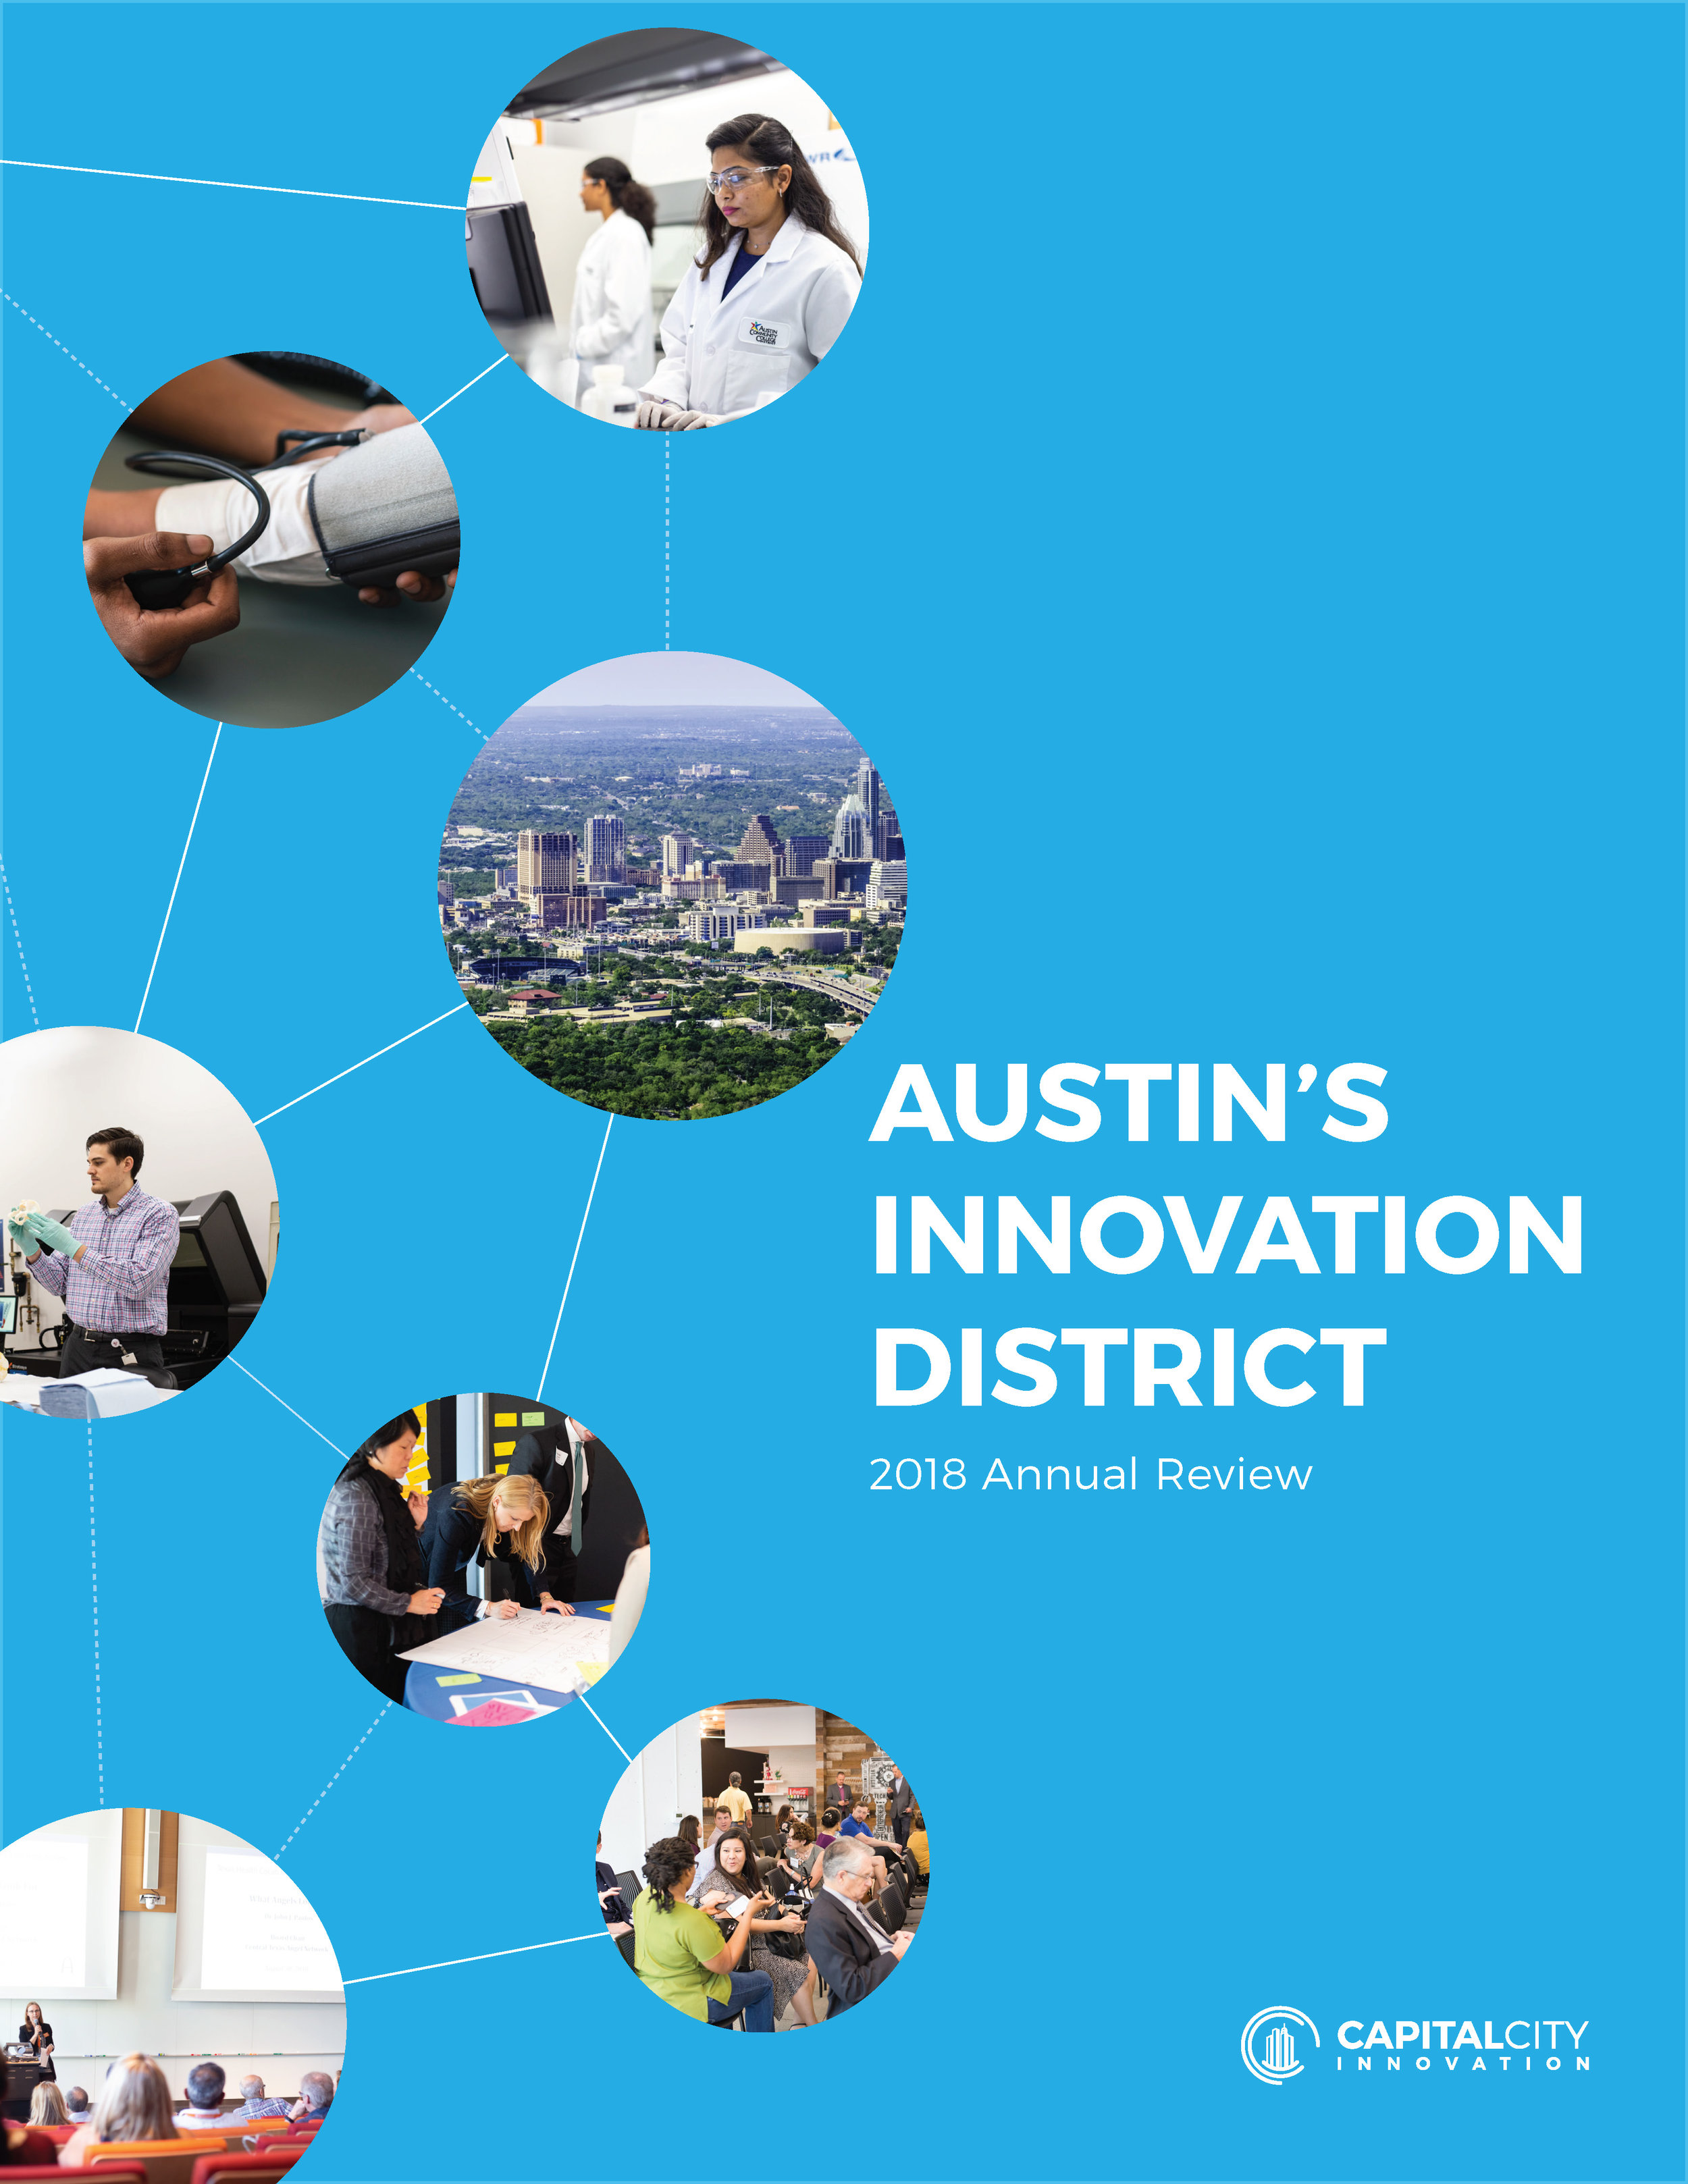 Austins Innovation District 2018 Annual Review